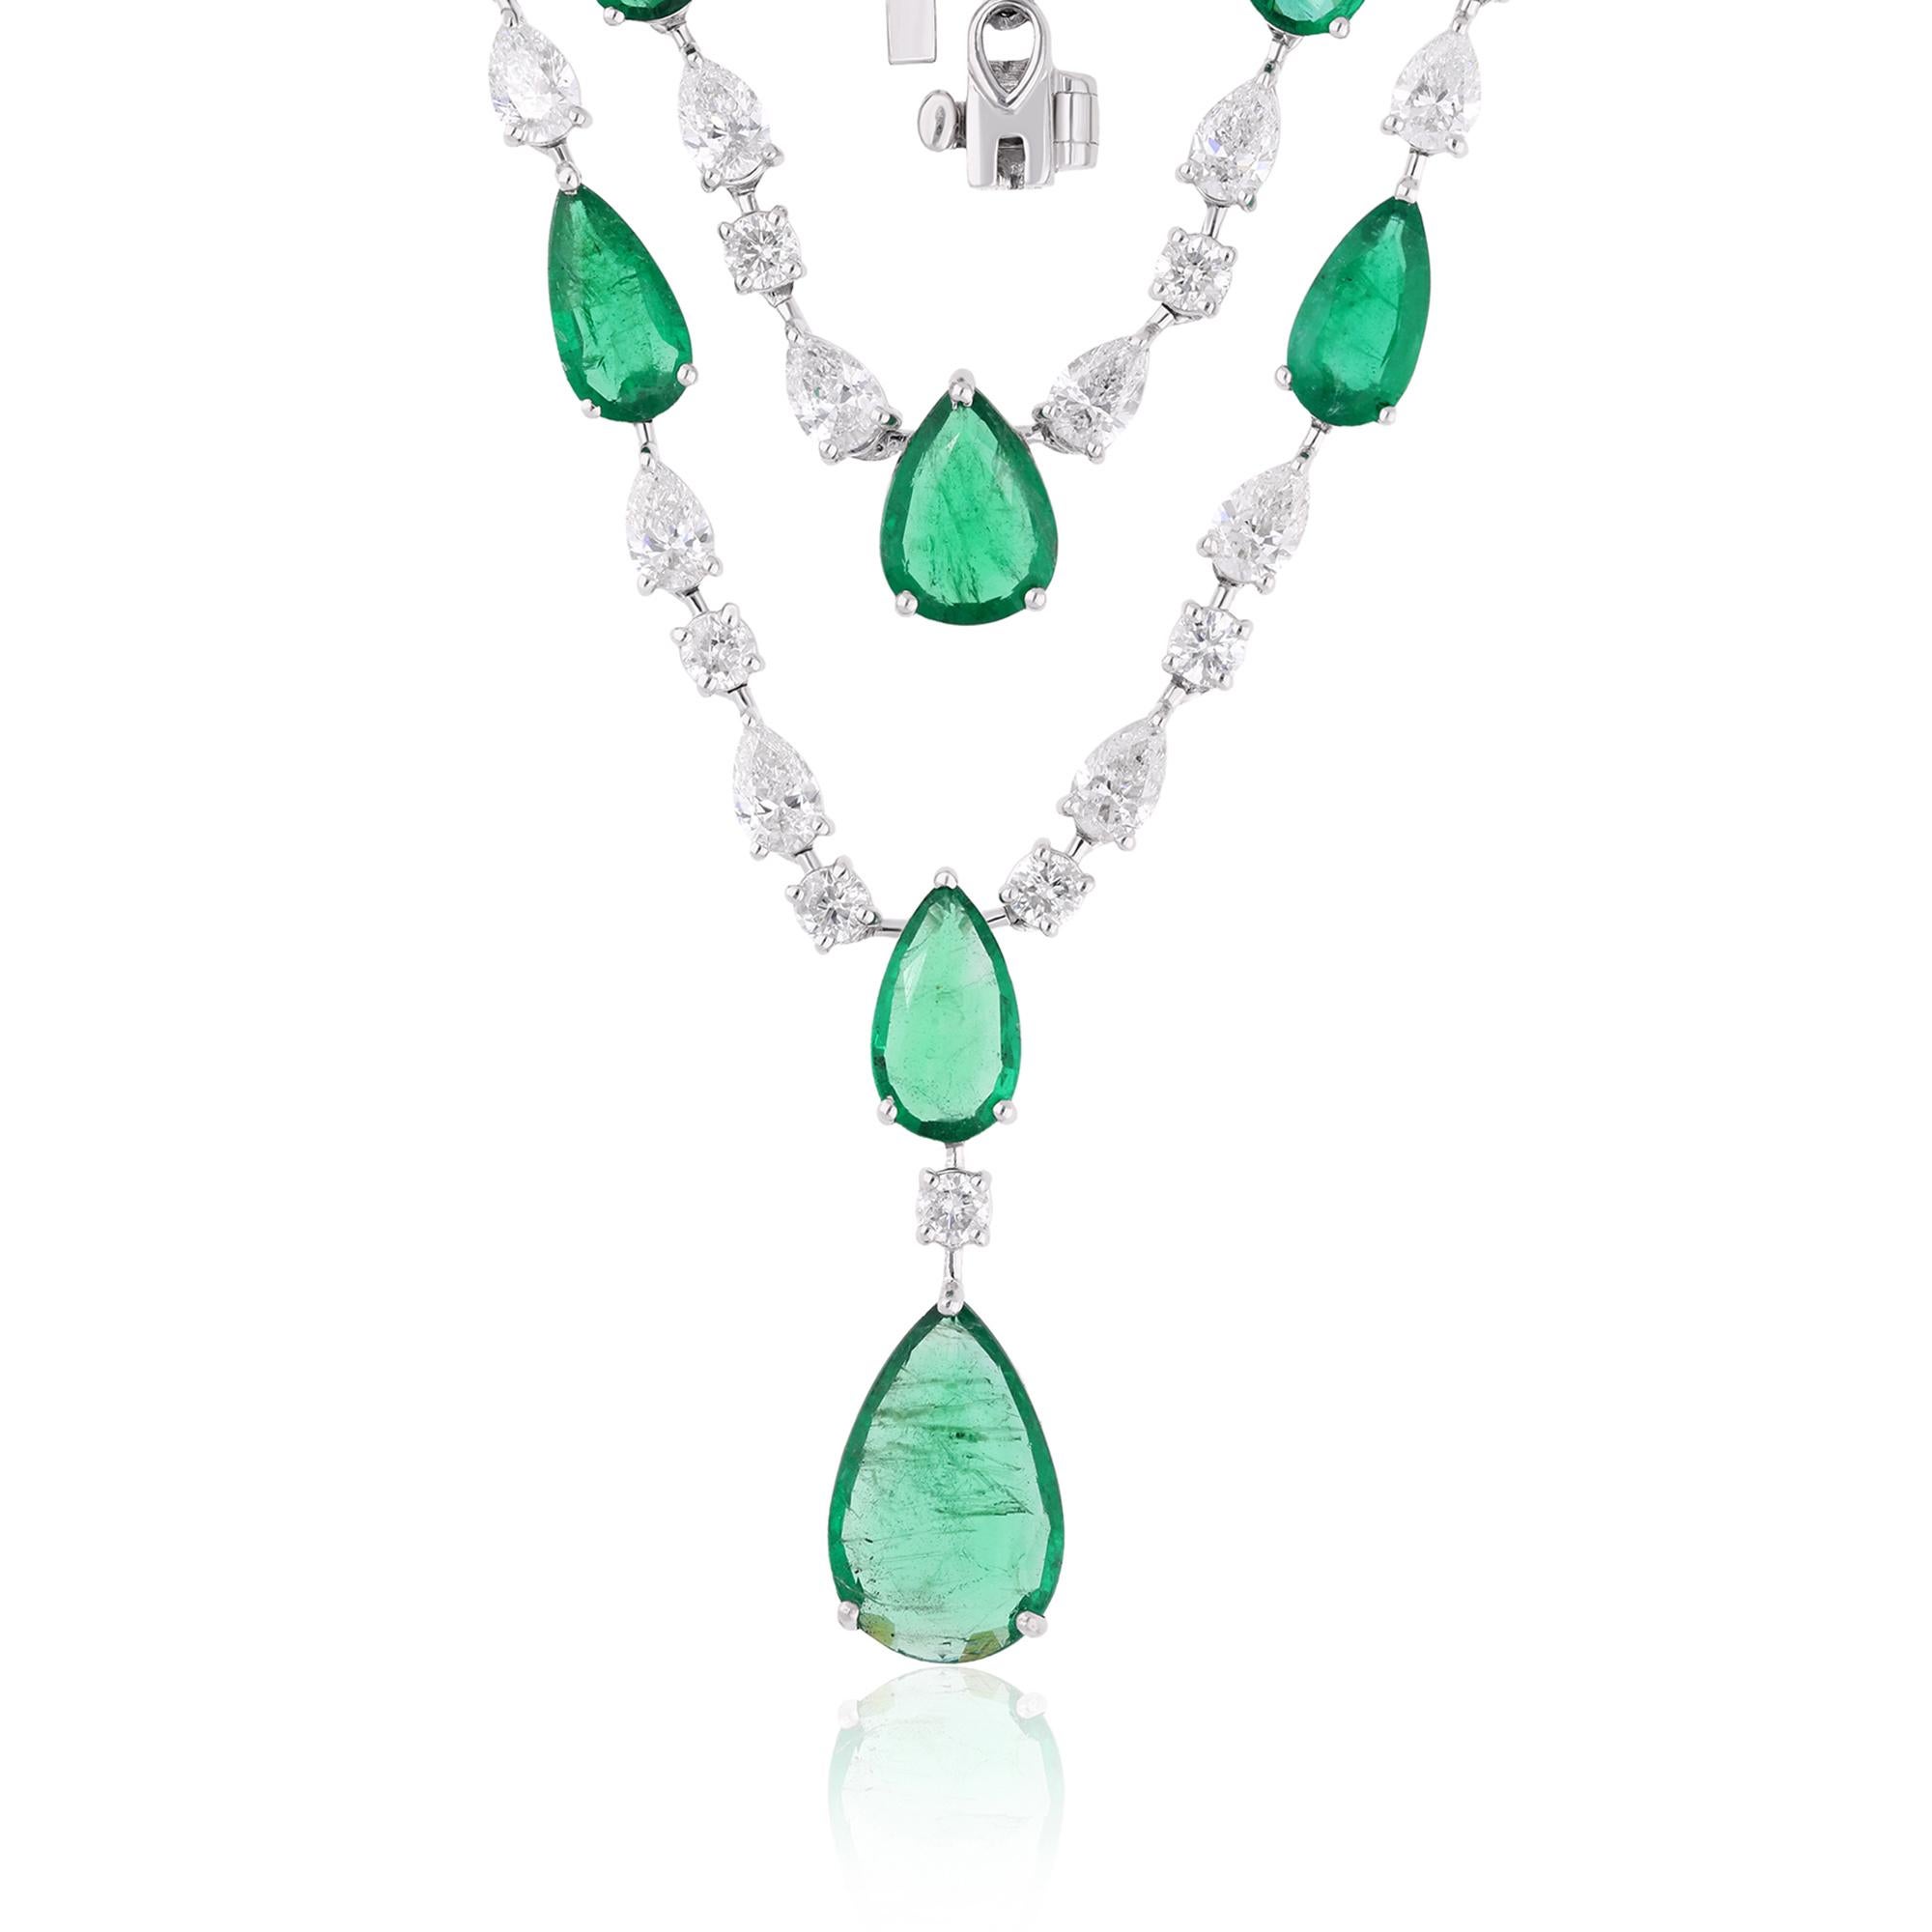 Crafted with meticulous attention to detail, the necklace is fashioned in 14 Karat White Gold, adding a timeless elegance to the design. The lustrous white gold setting provides the perfect backdrop for the emerald and diamonds, creating a